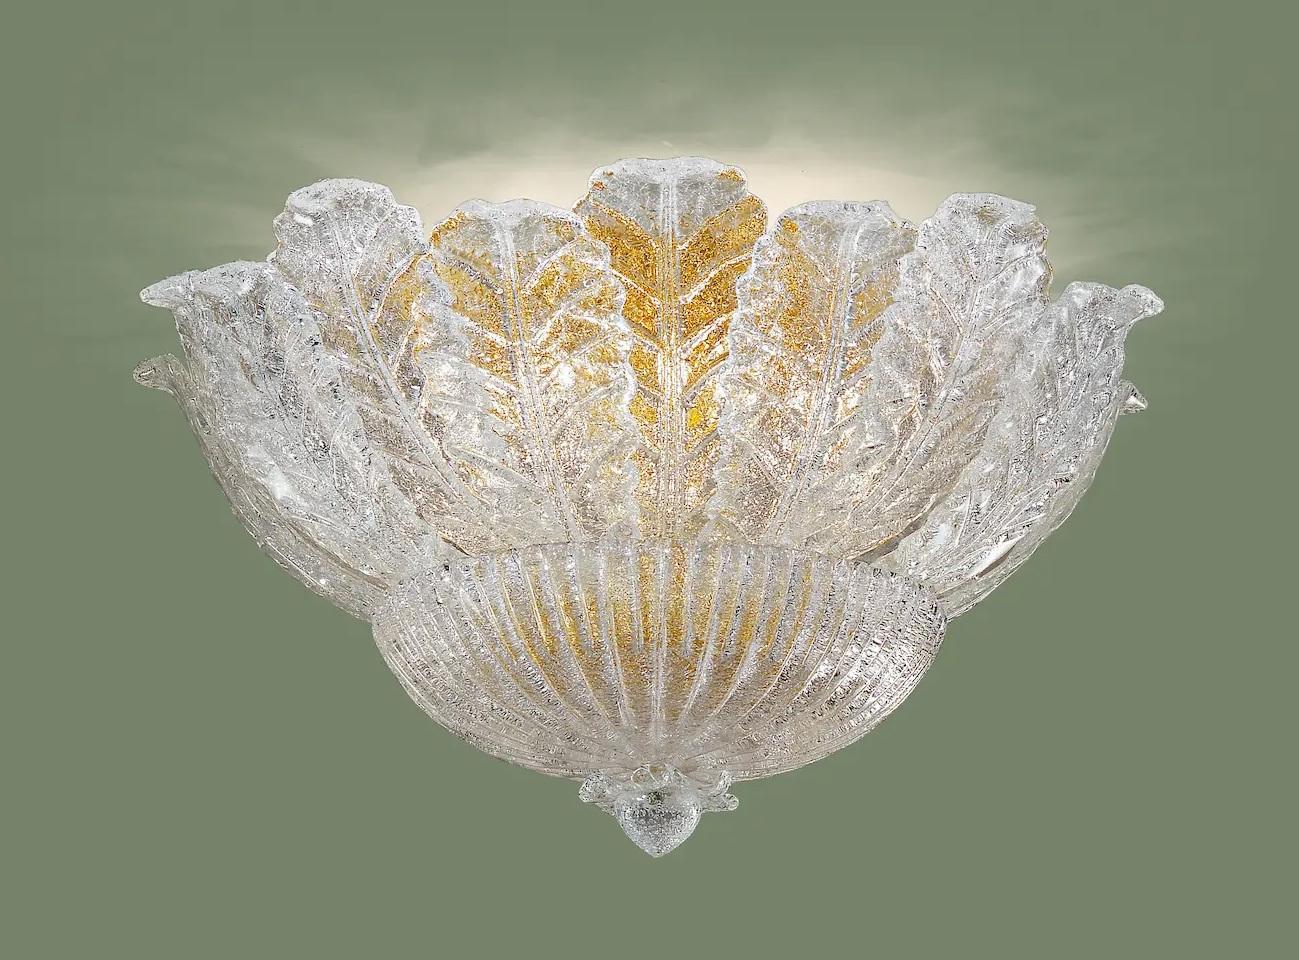 Italian flush mount with clear Murano glass leaves hand blown in Graniglia technique to produce granular textured effect, mounted on 24 K gold plated finish metal frame / Made in Italy in the style of Barovier e Toso
6 lights / E12 or E14 type / max